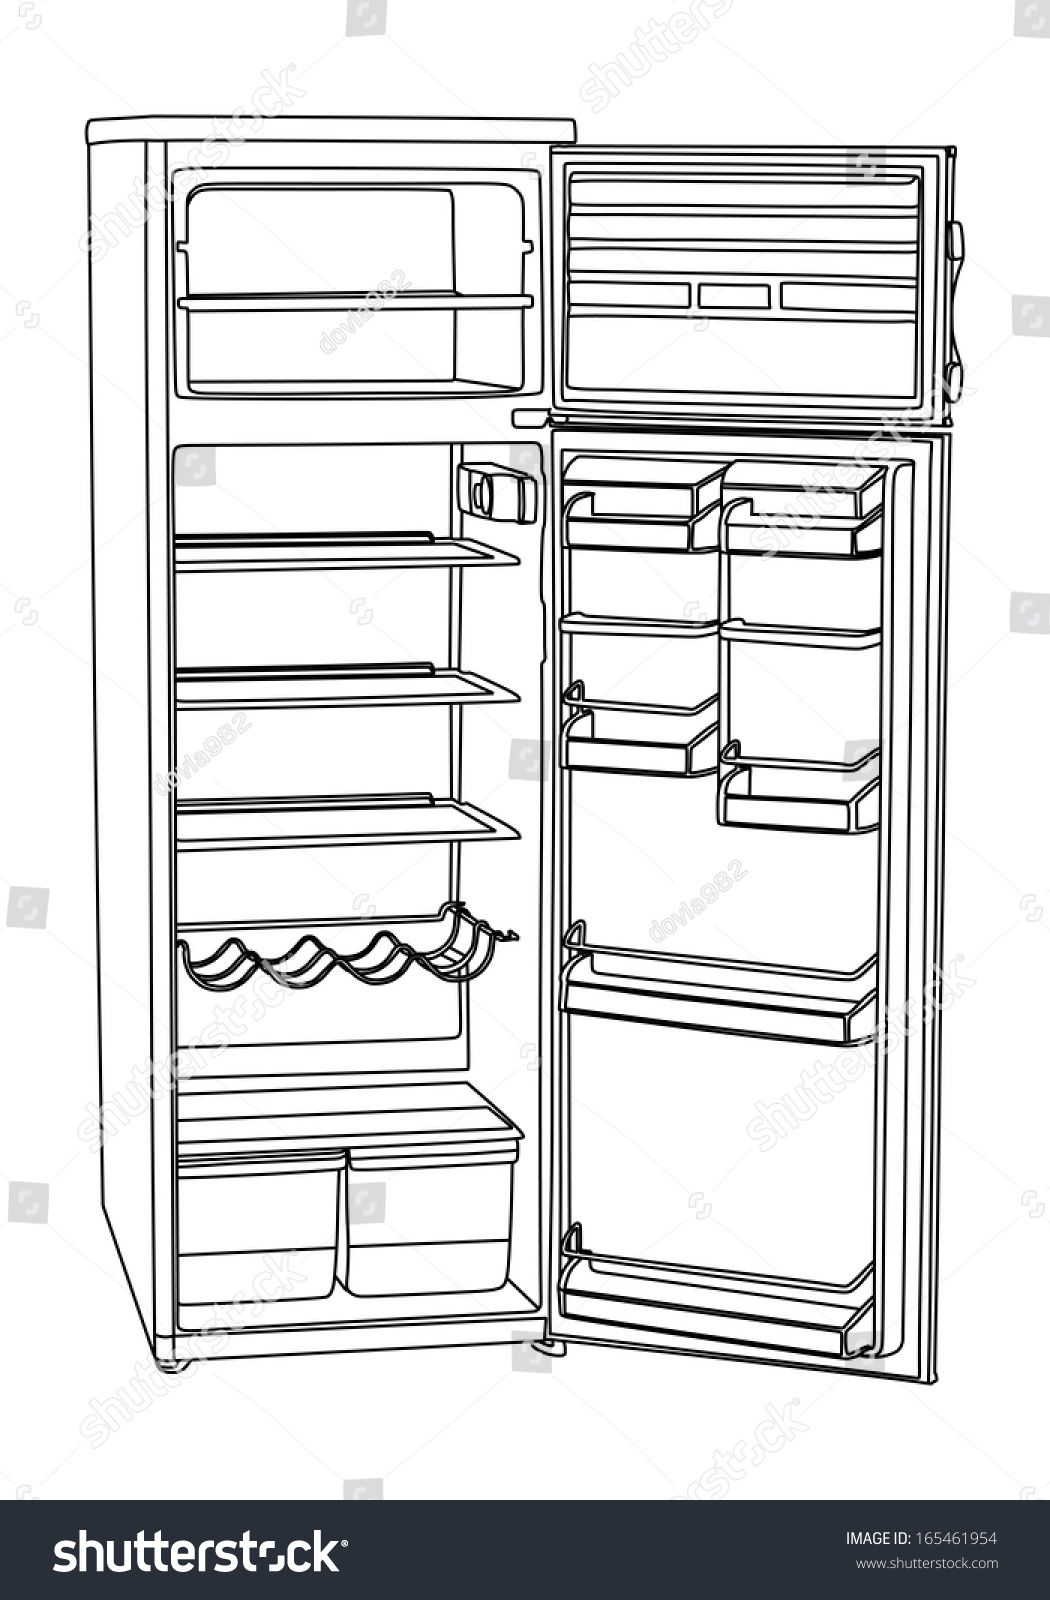 refrigerator clipart black and white - photo #31